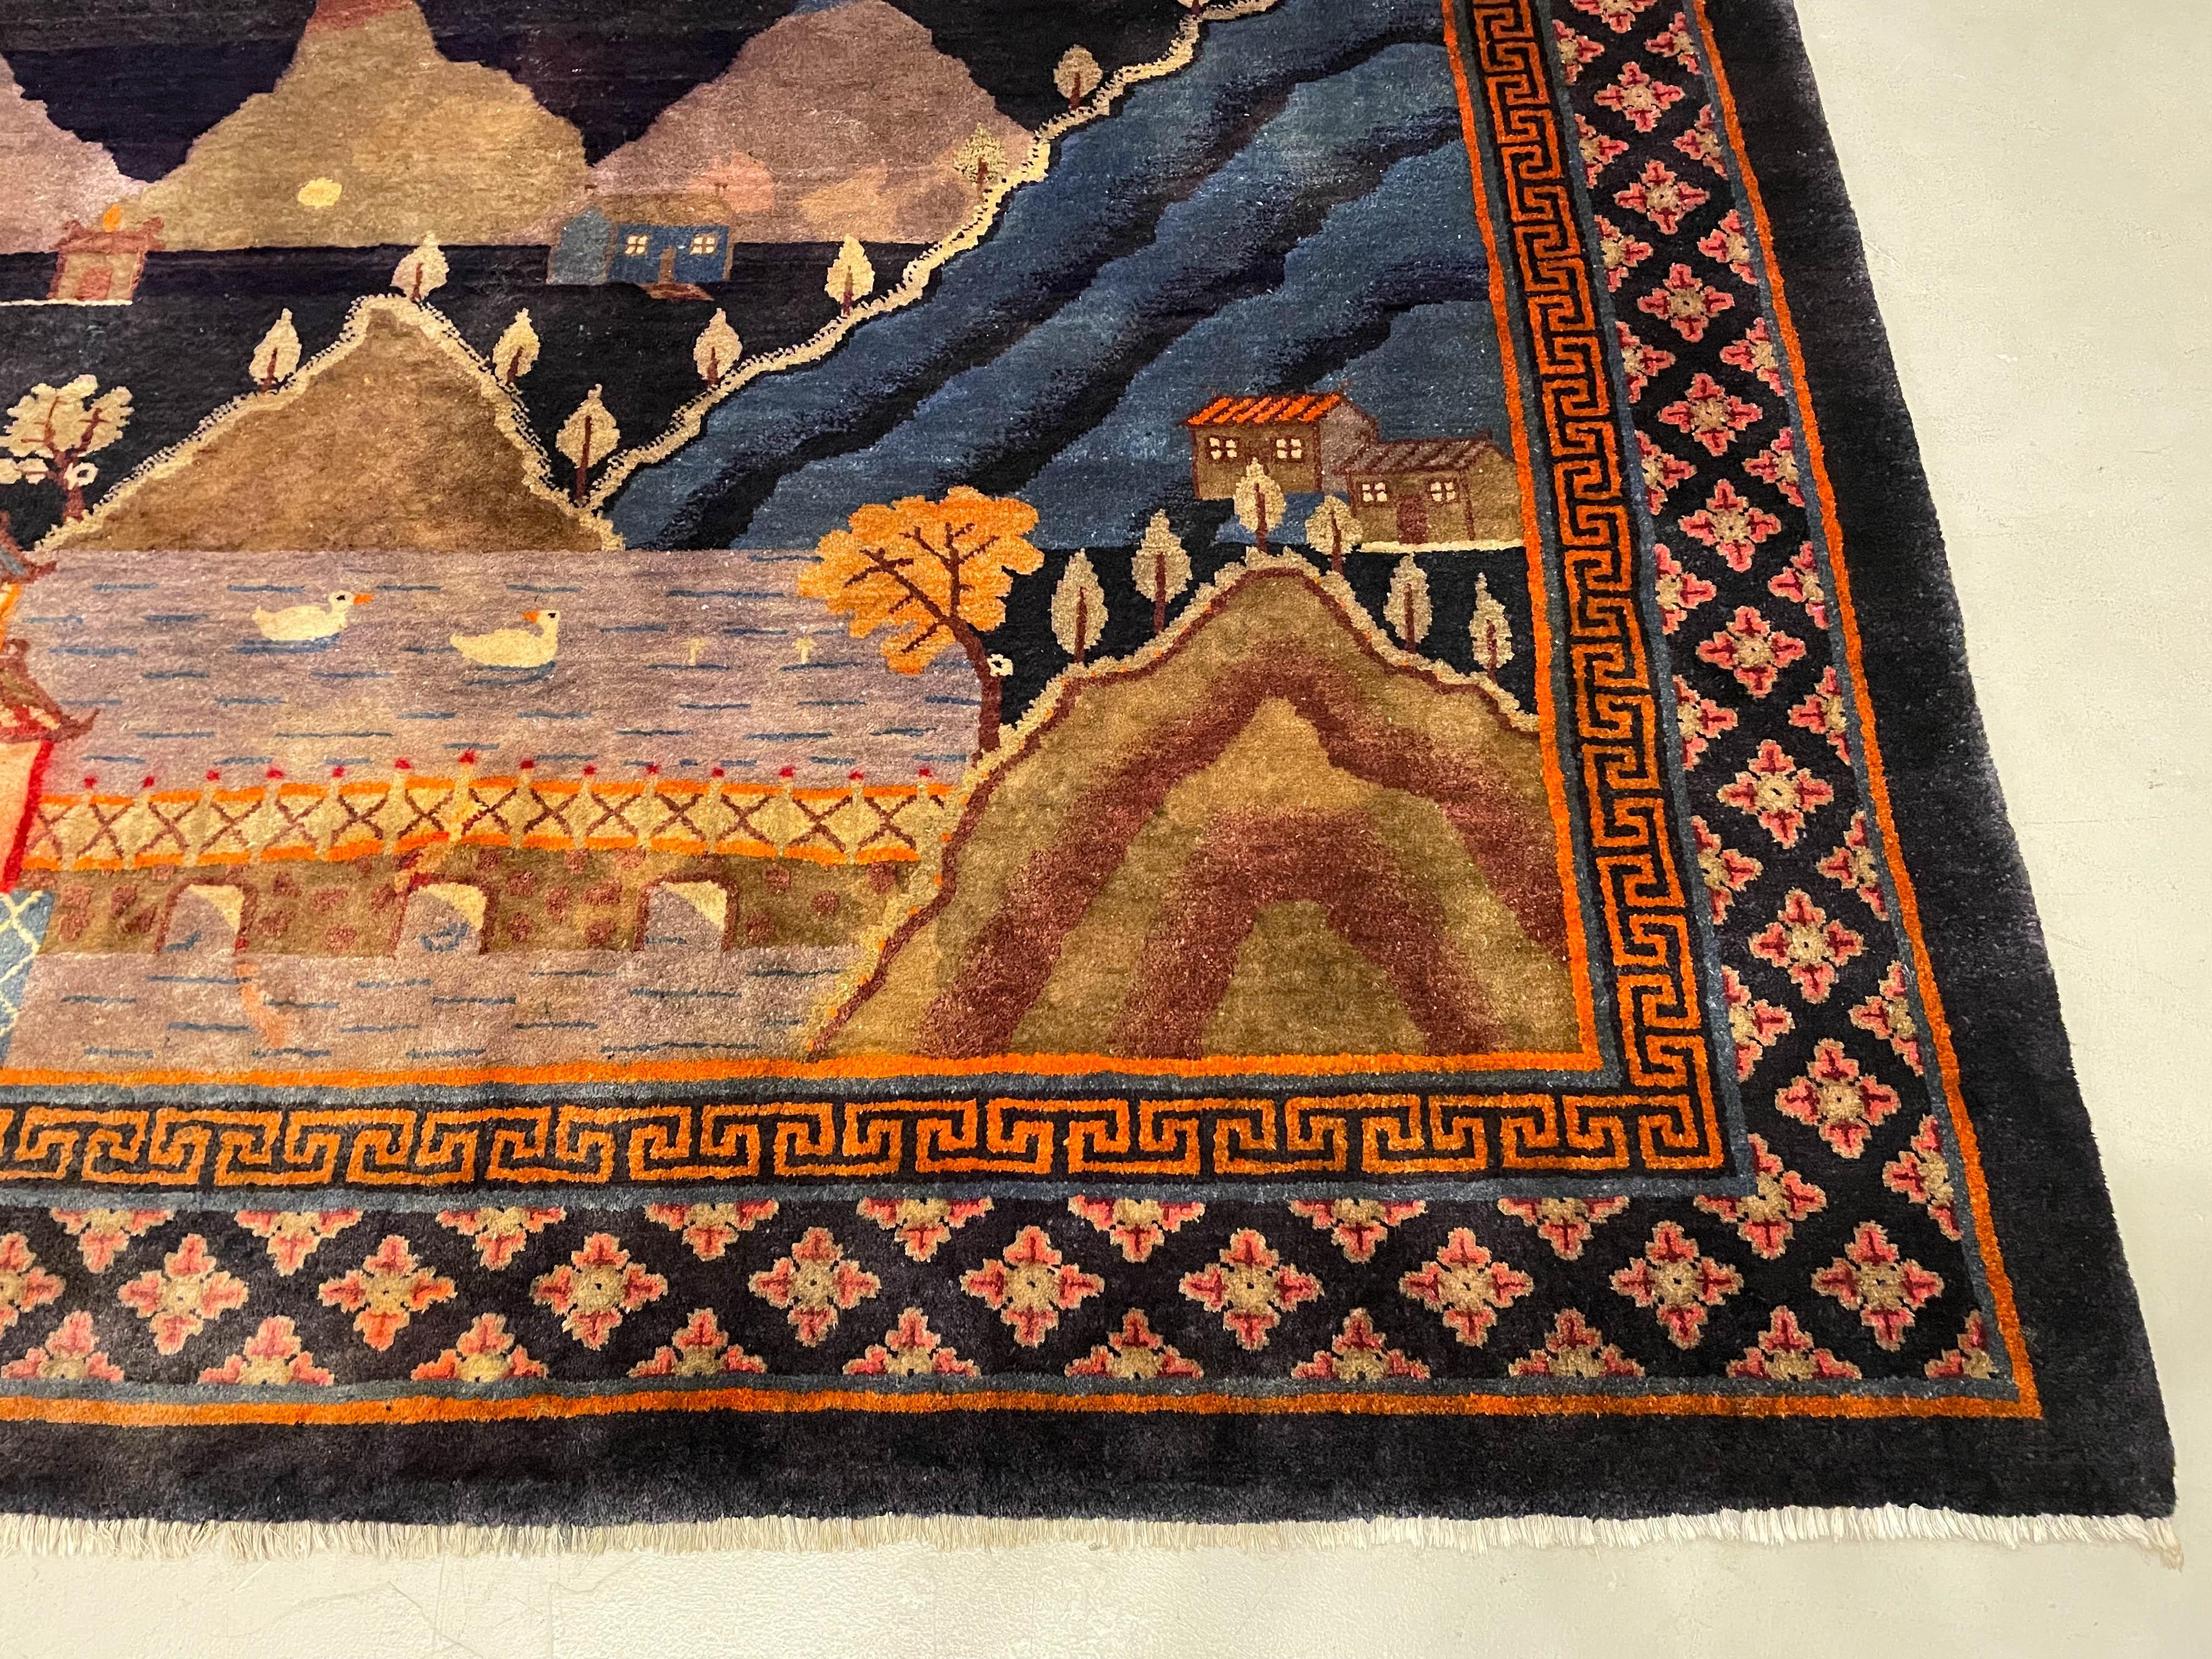 Chinese Art Deco Baotou Pictorial Landscape Rug In Good Condition For Sale In Winter Park, FL